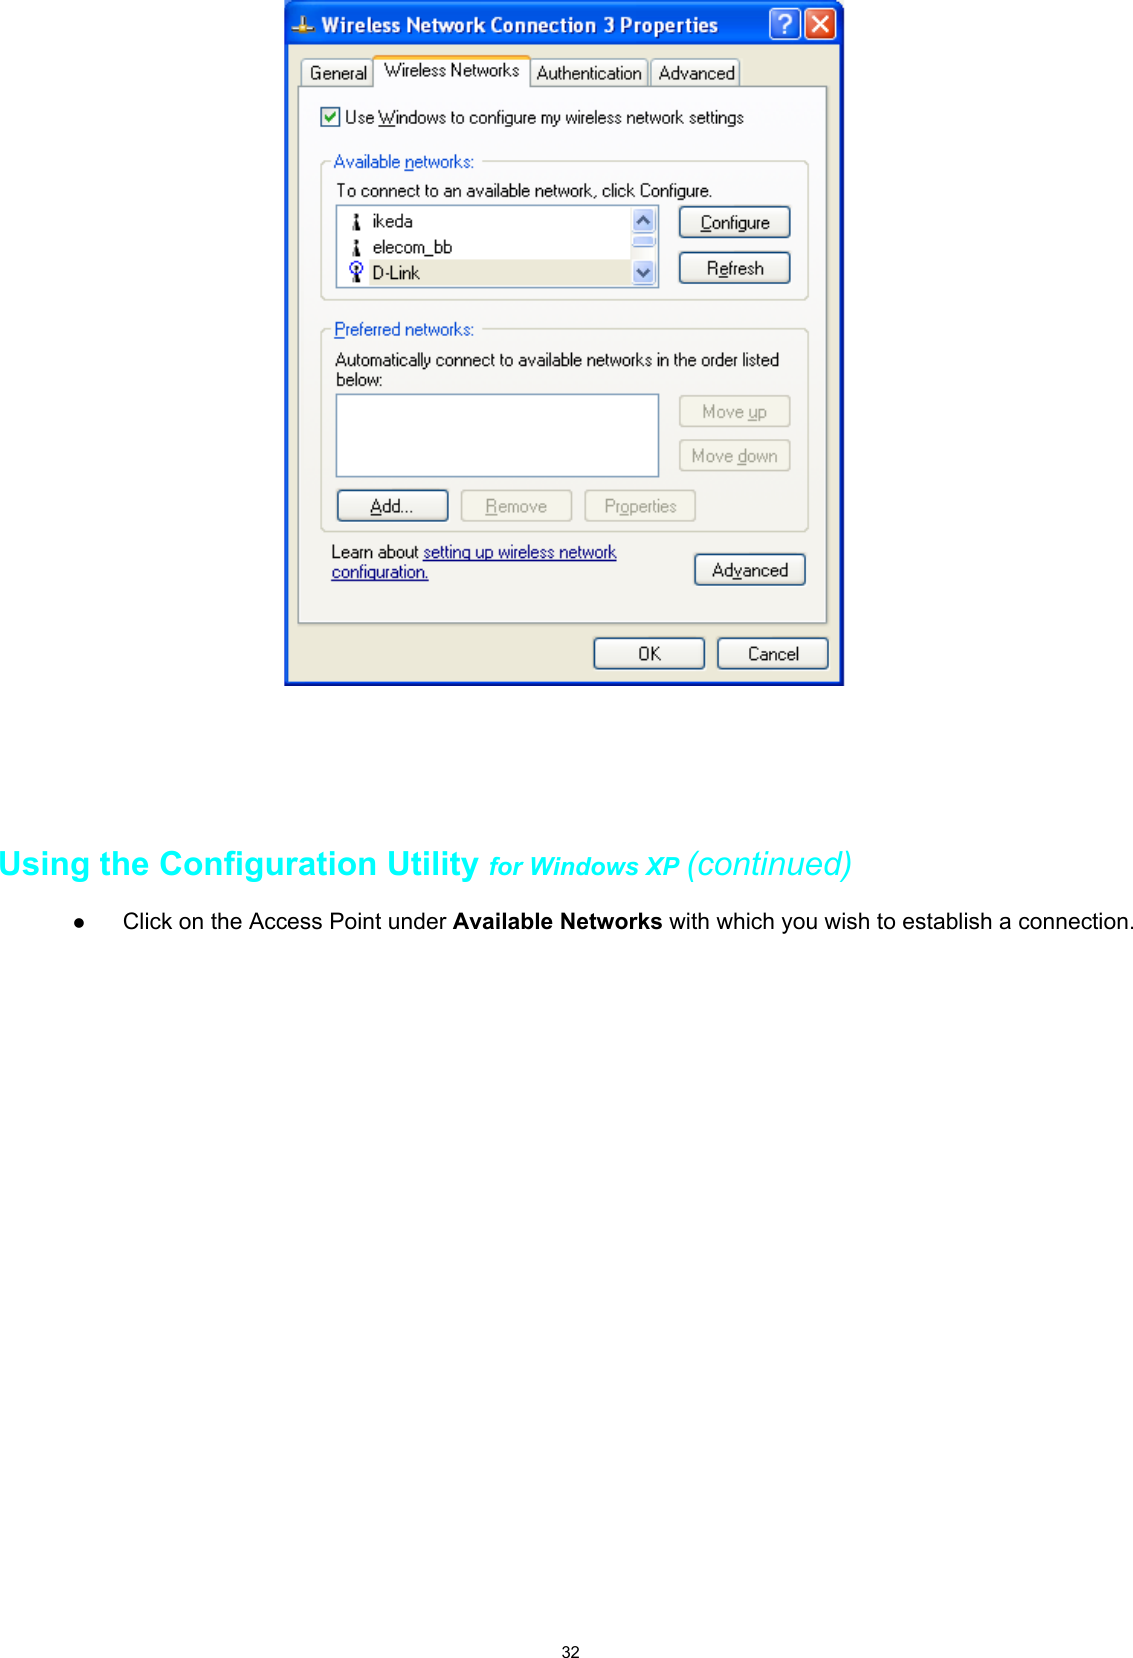 32Using the Configuration Utility for Windows XP (continued)z Click on the Access Point under Available Networks with which you wish to establish a connection.